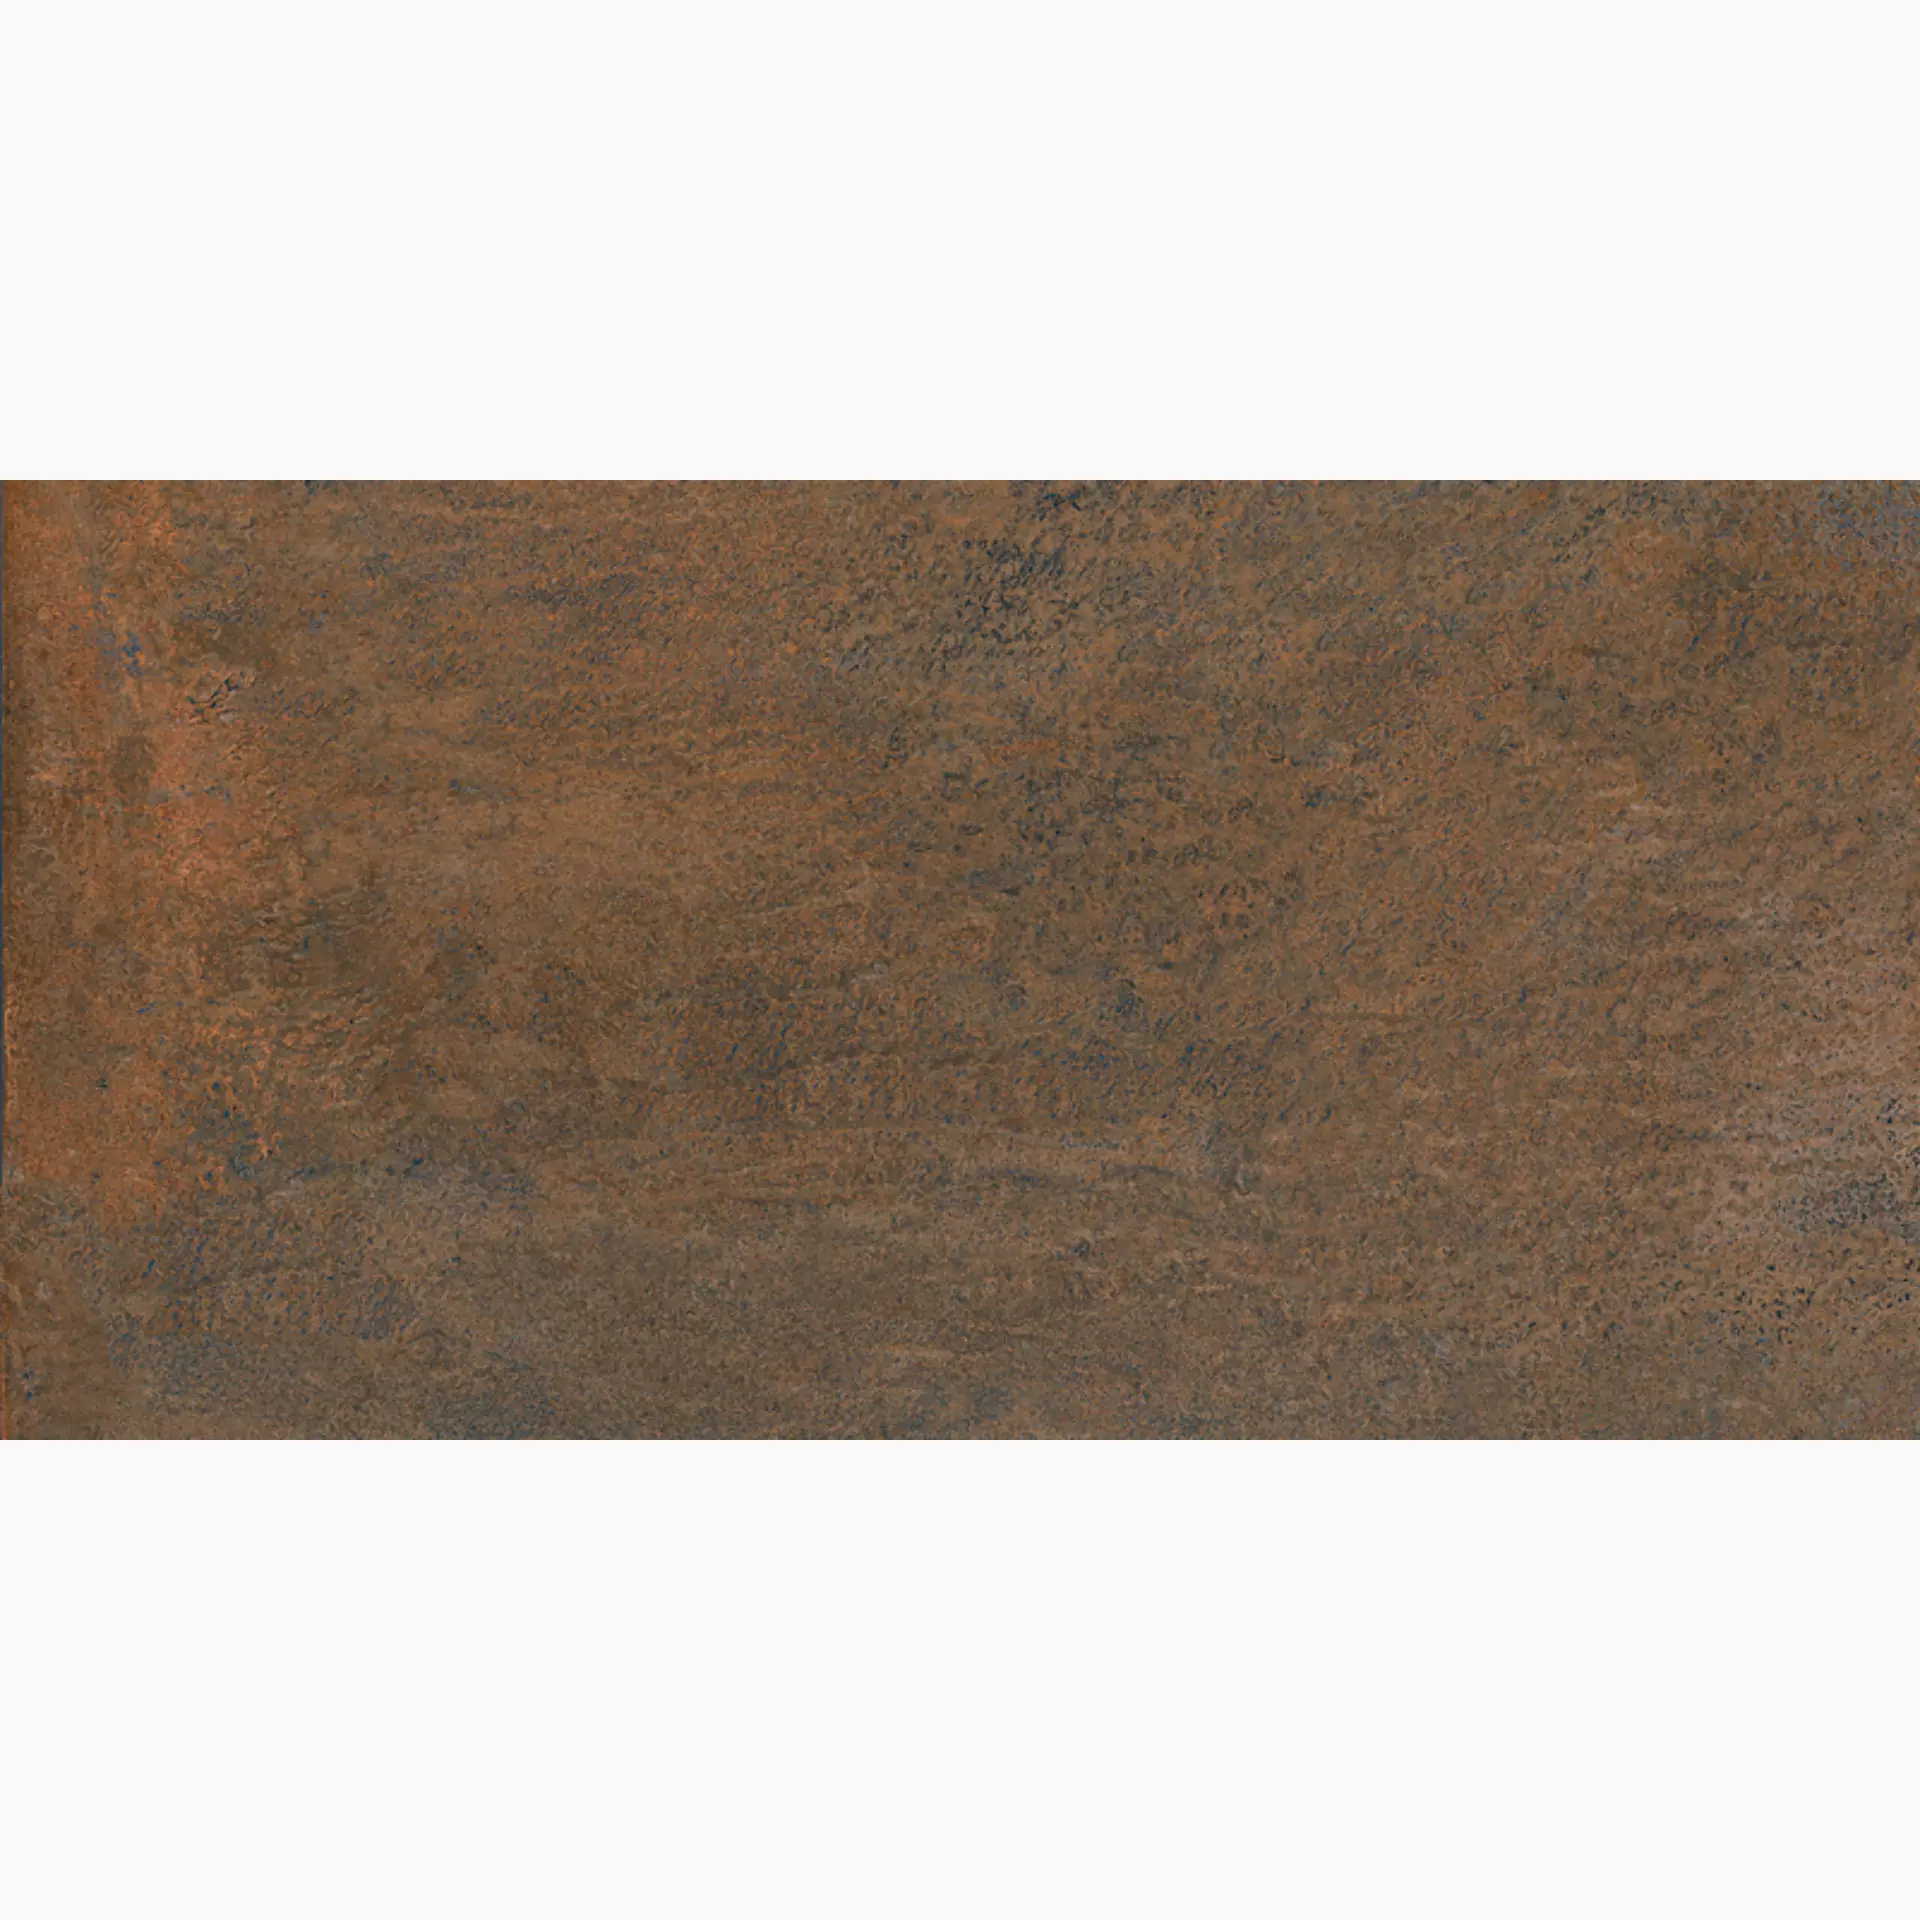 Sant Agostino Oxidart Copper Natural CSAOXCOP12 60x120cm rectified 10mm